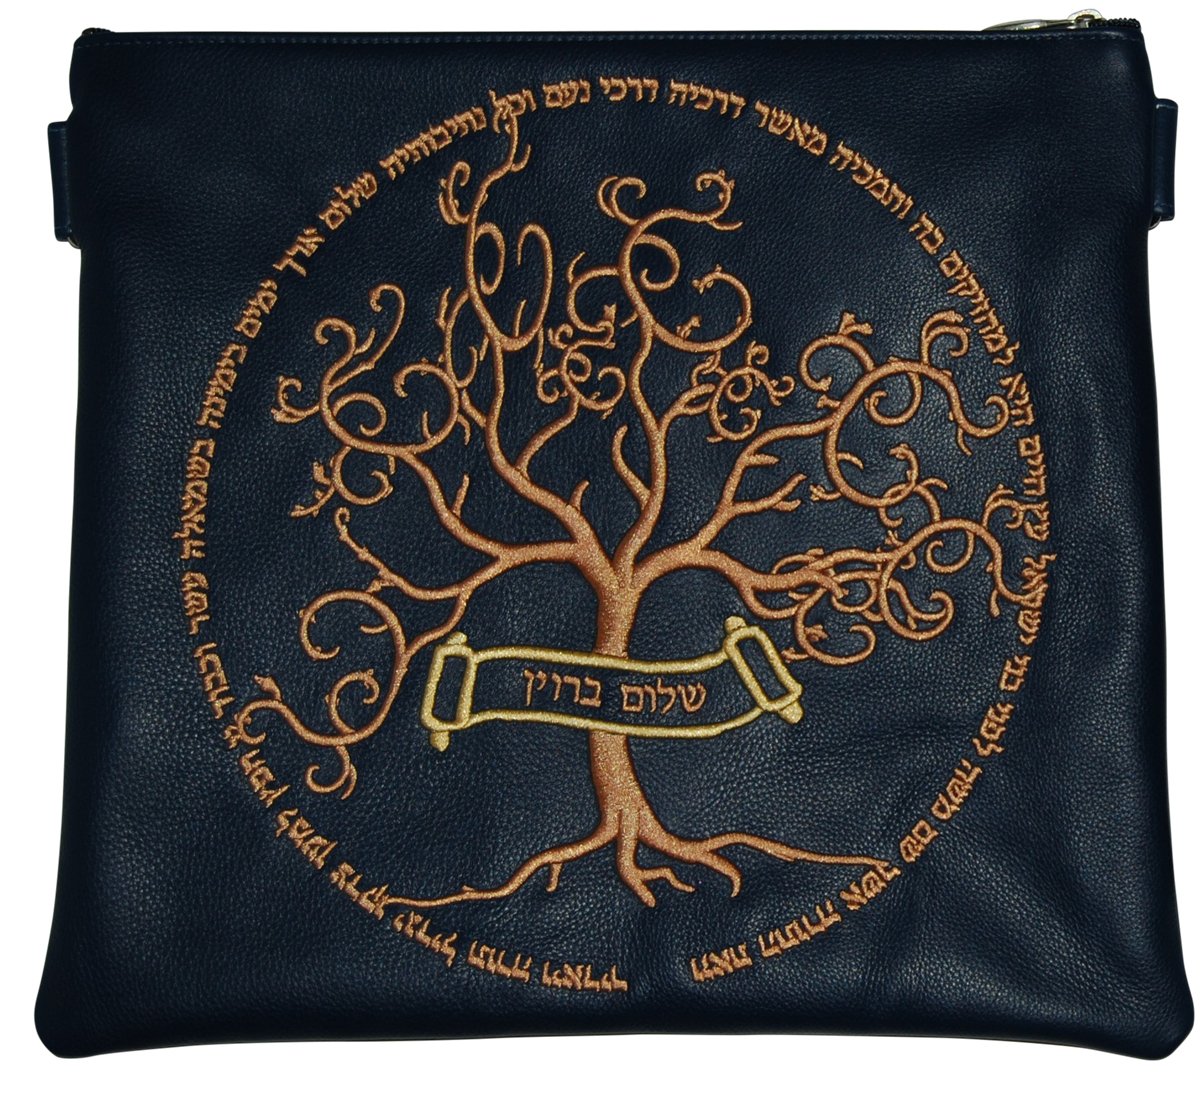 Artistic tree design on cobalt leather - Simcha Couture